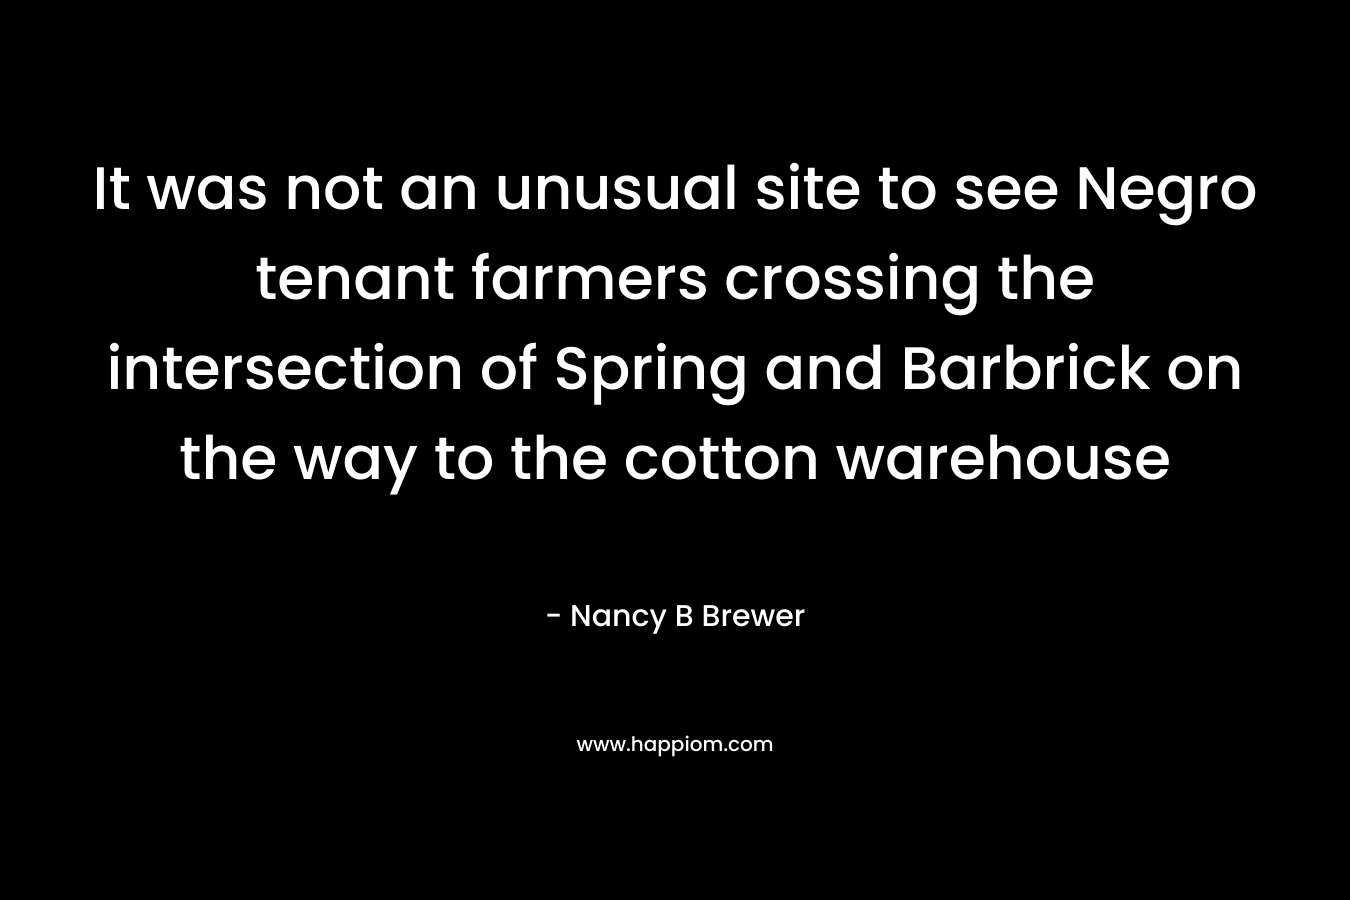 It was not an unusual site to see Negro tenant farmers crossing the intersection of Spring and Barbrick on the way to the cotton warehouse